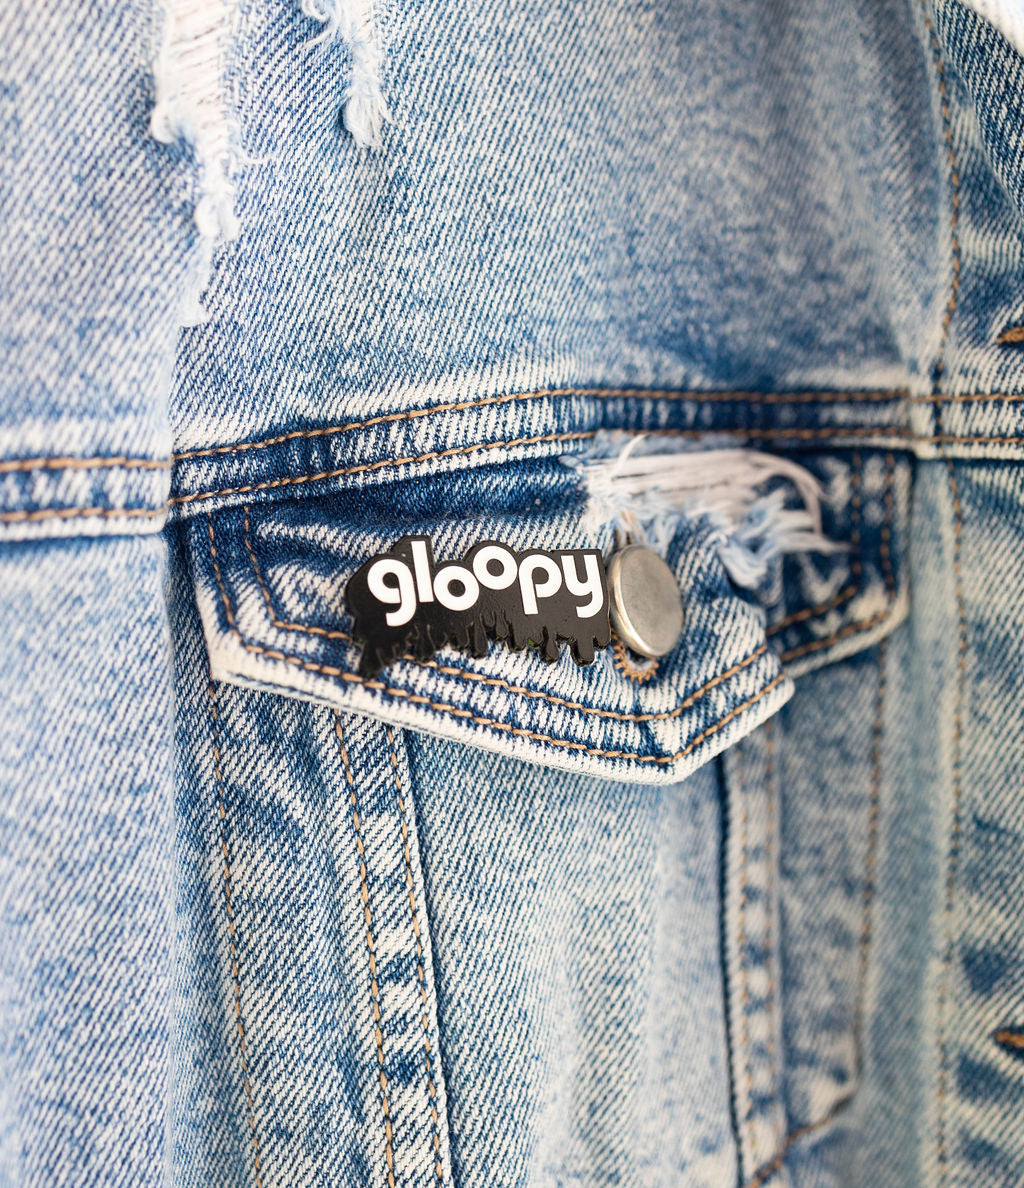 gloopy Industries - Special products and merch from The Aquabats!